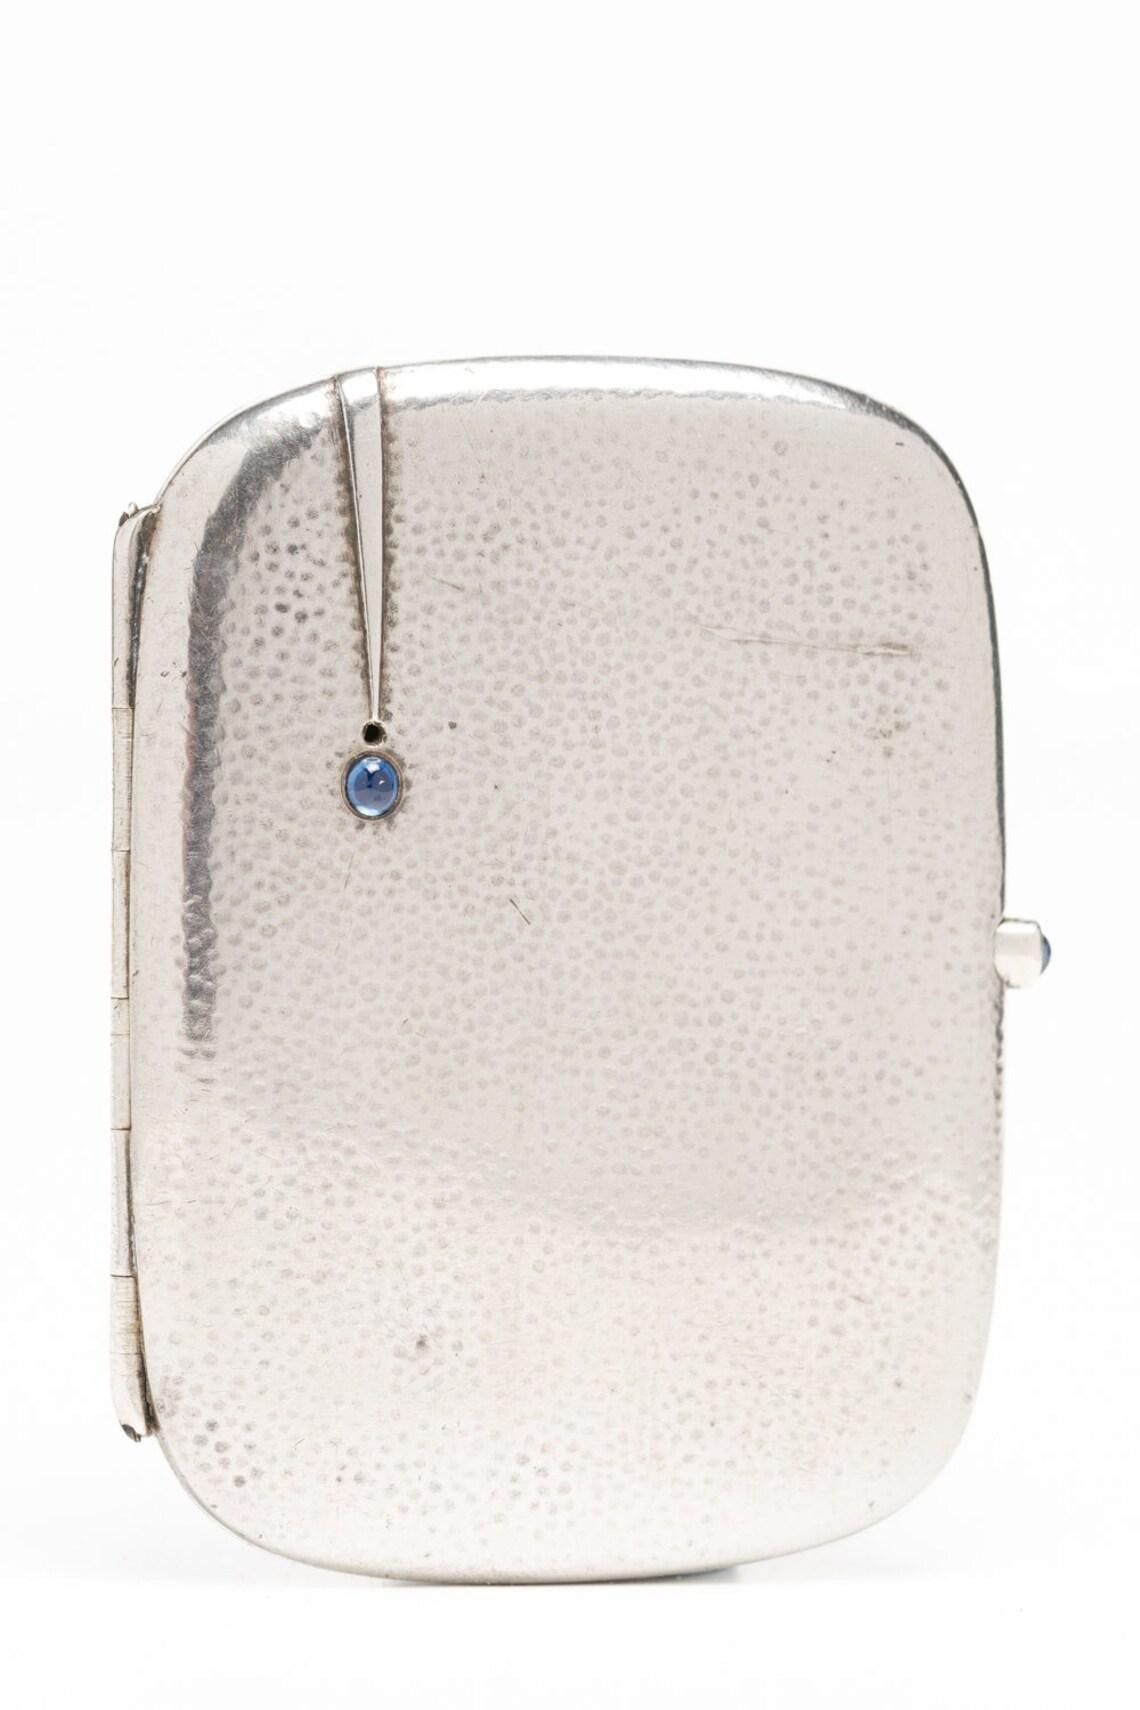 This rare Jugendstil German silver and sapphire cabochon cigarette case was made by renowned German silversmith Louis Kuppenheim, circa 1900. This unique piece is decorated with a geometric line on one side ending with an oval sapphire cabochon